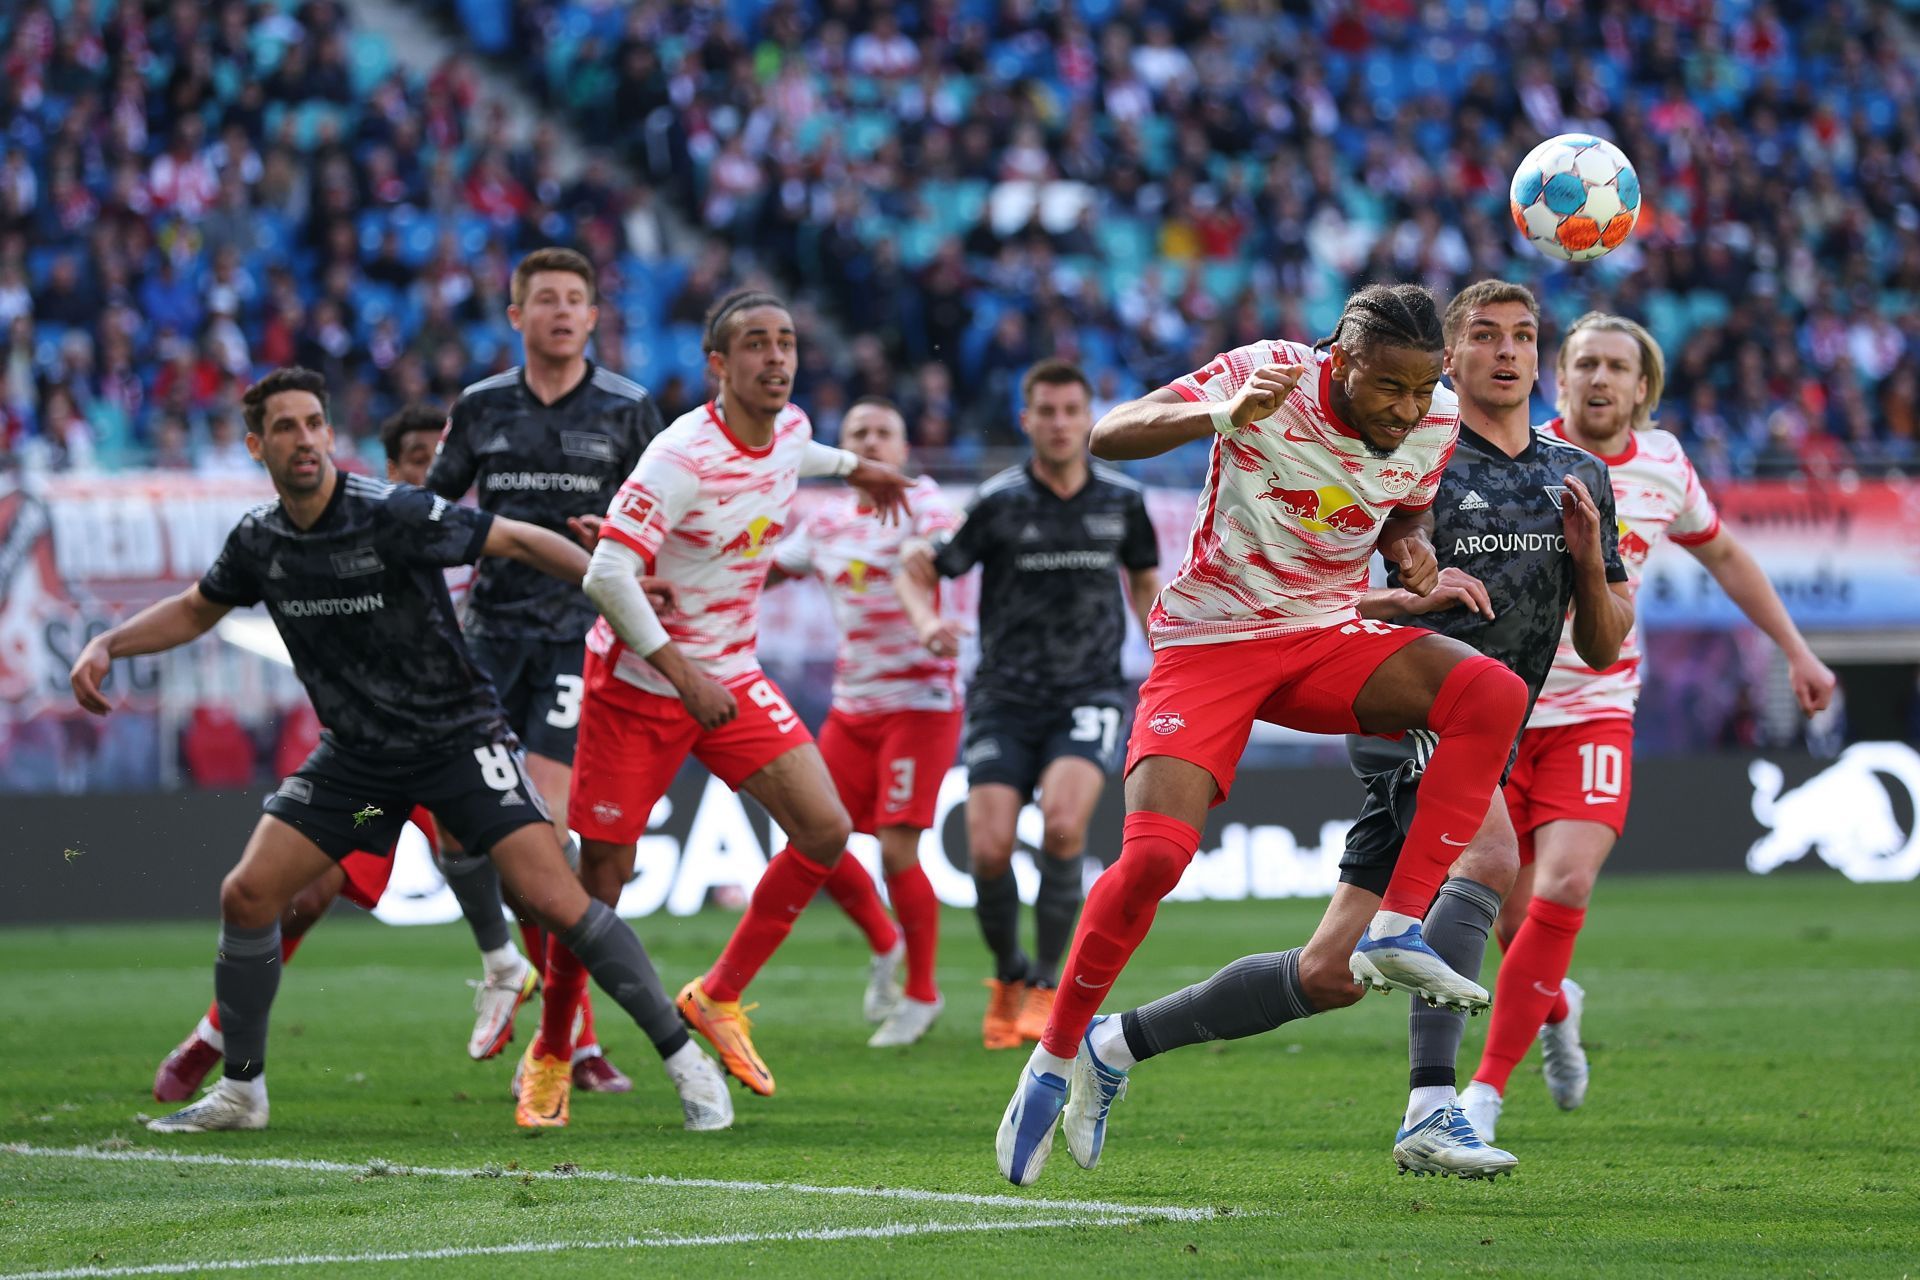 Union Berlin and RB Leipzig will meet for the first time this season on Saturday